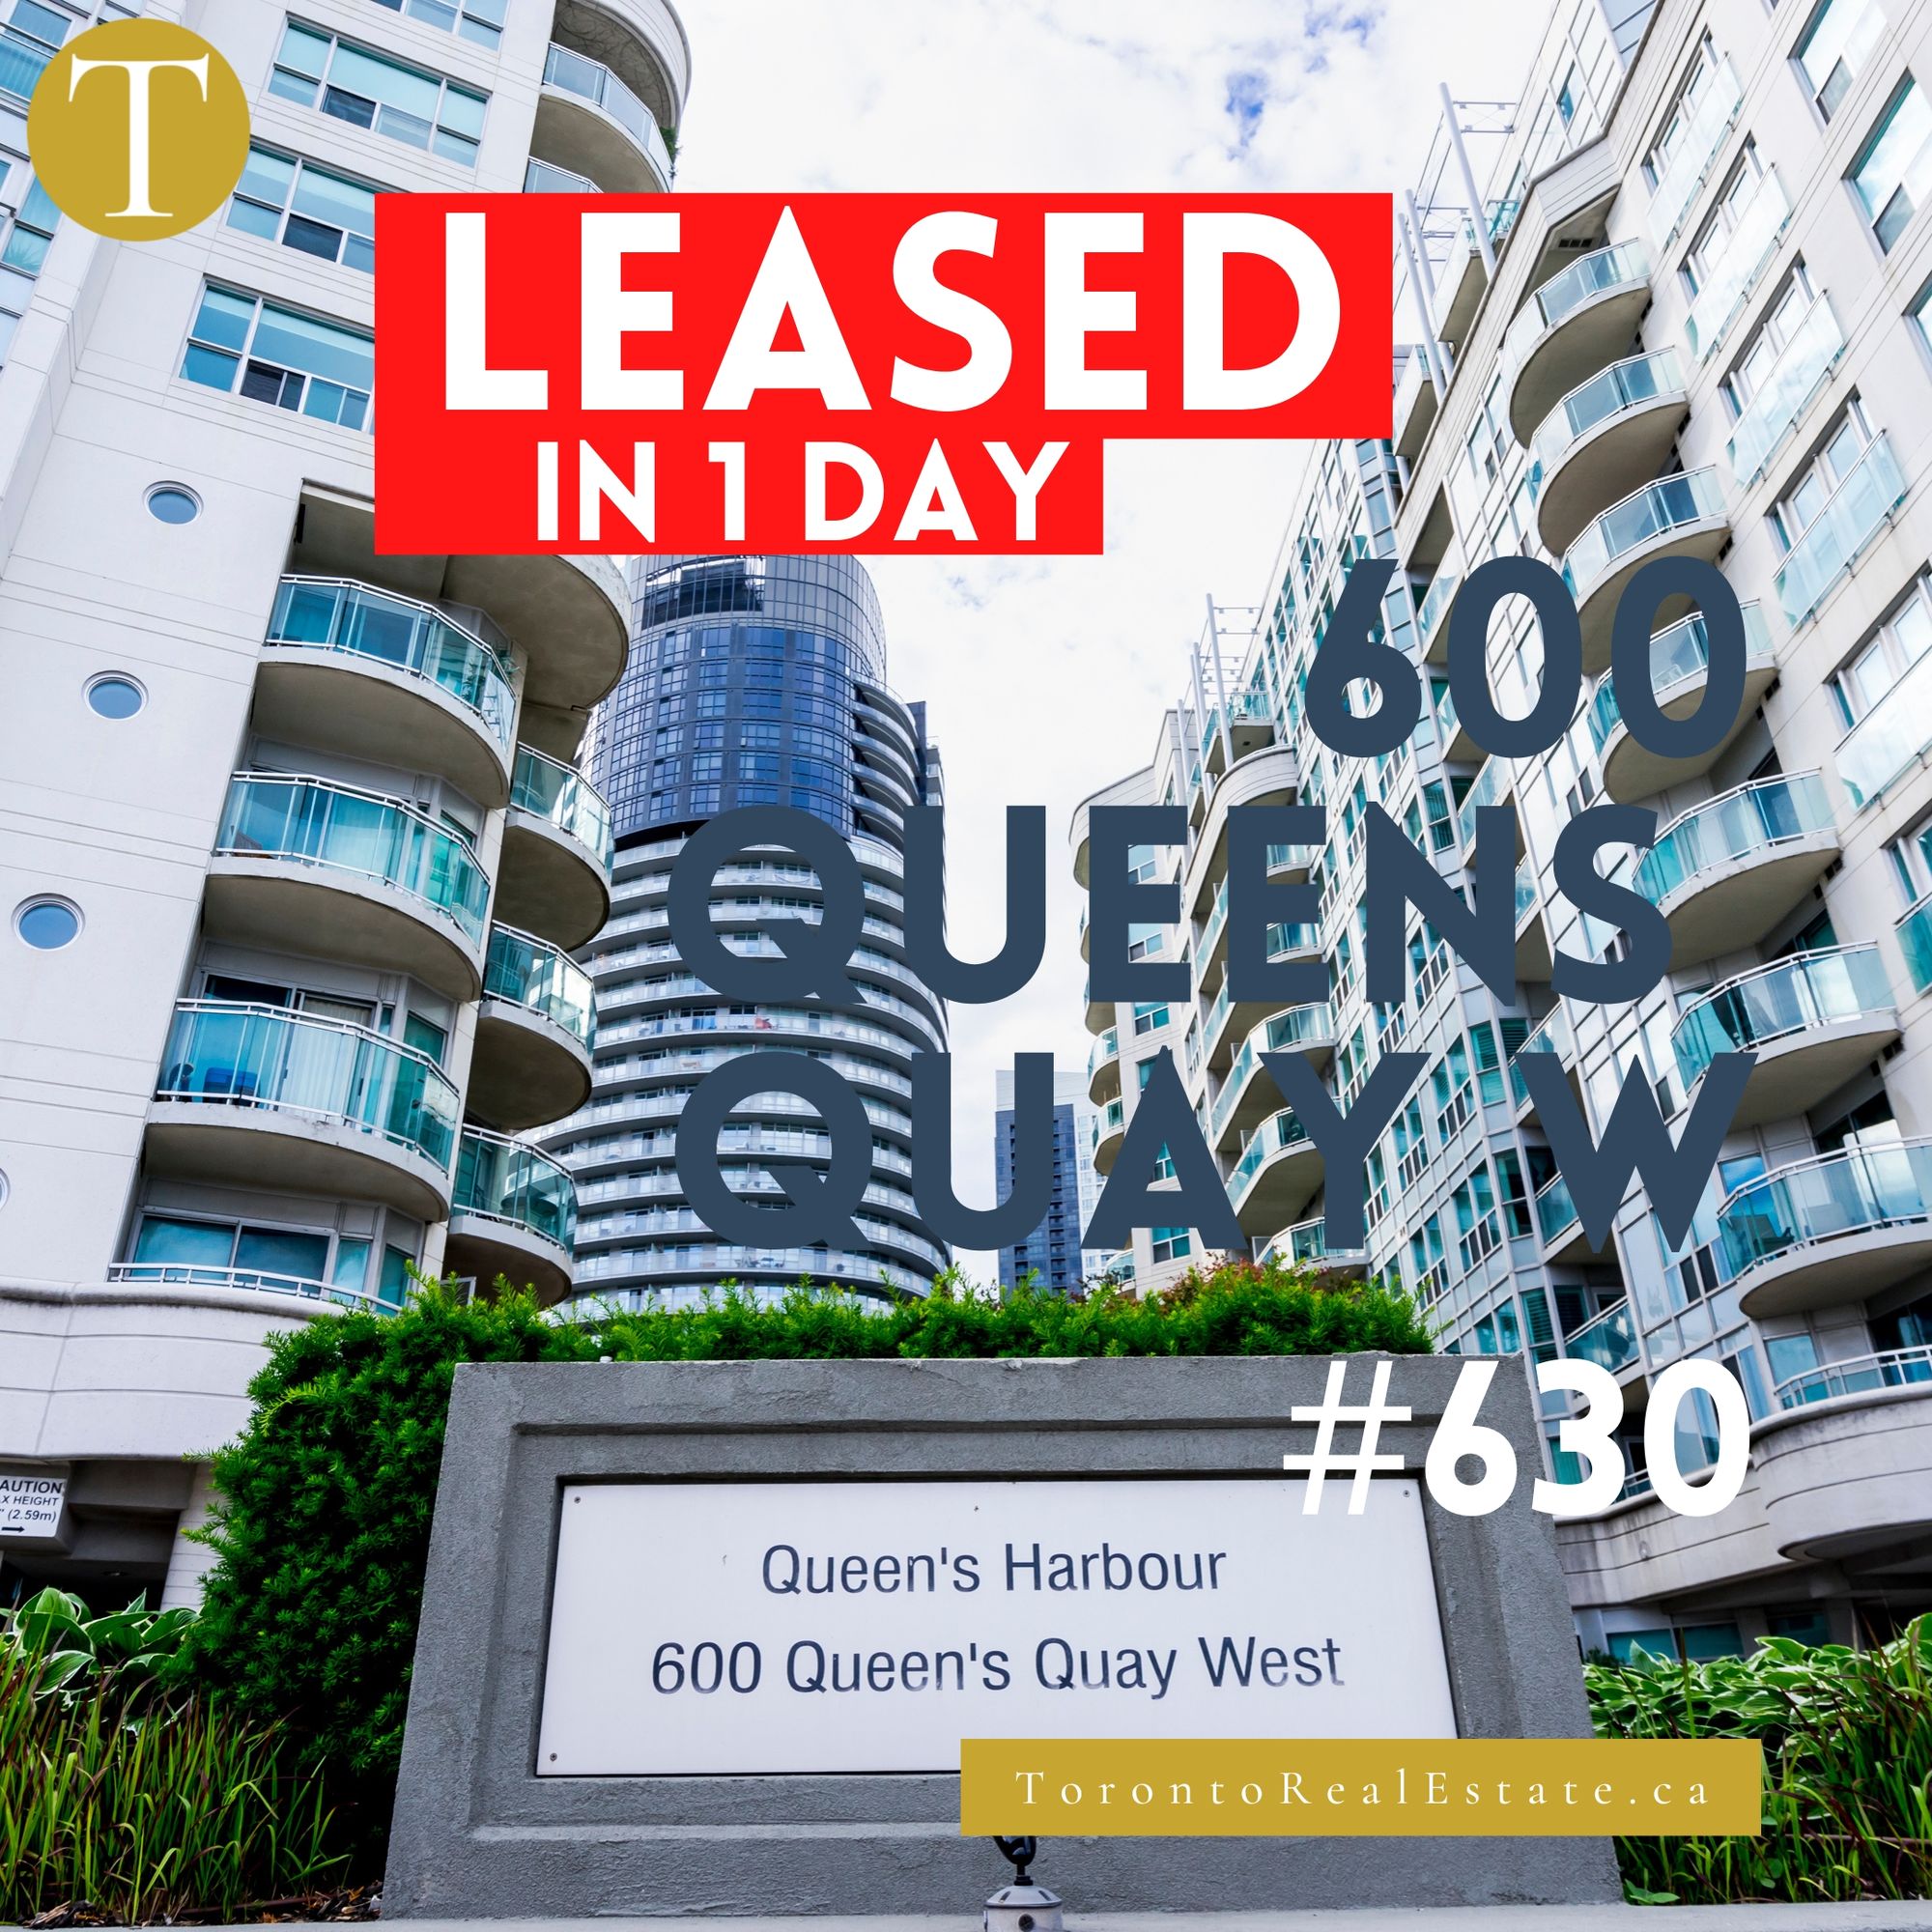 600 Queens Quay W #630 | LEASED IN 1 DAY